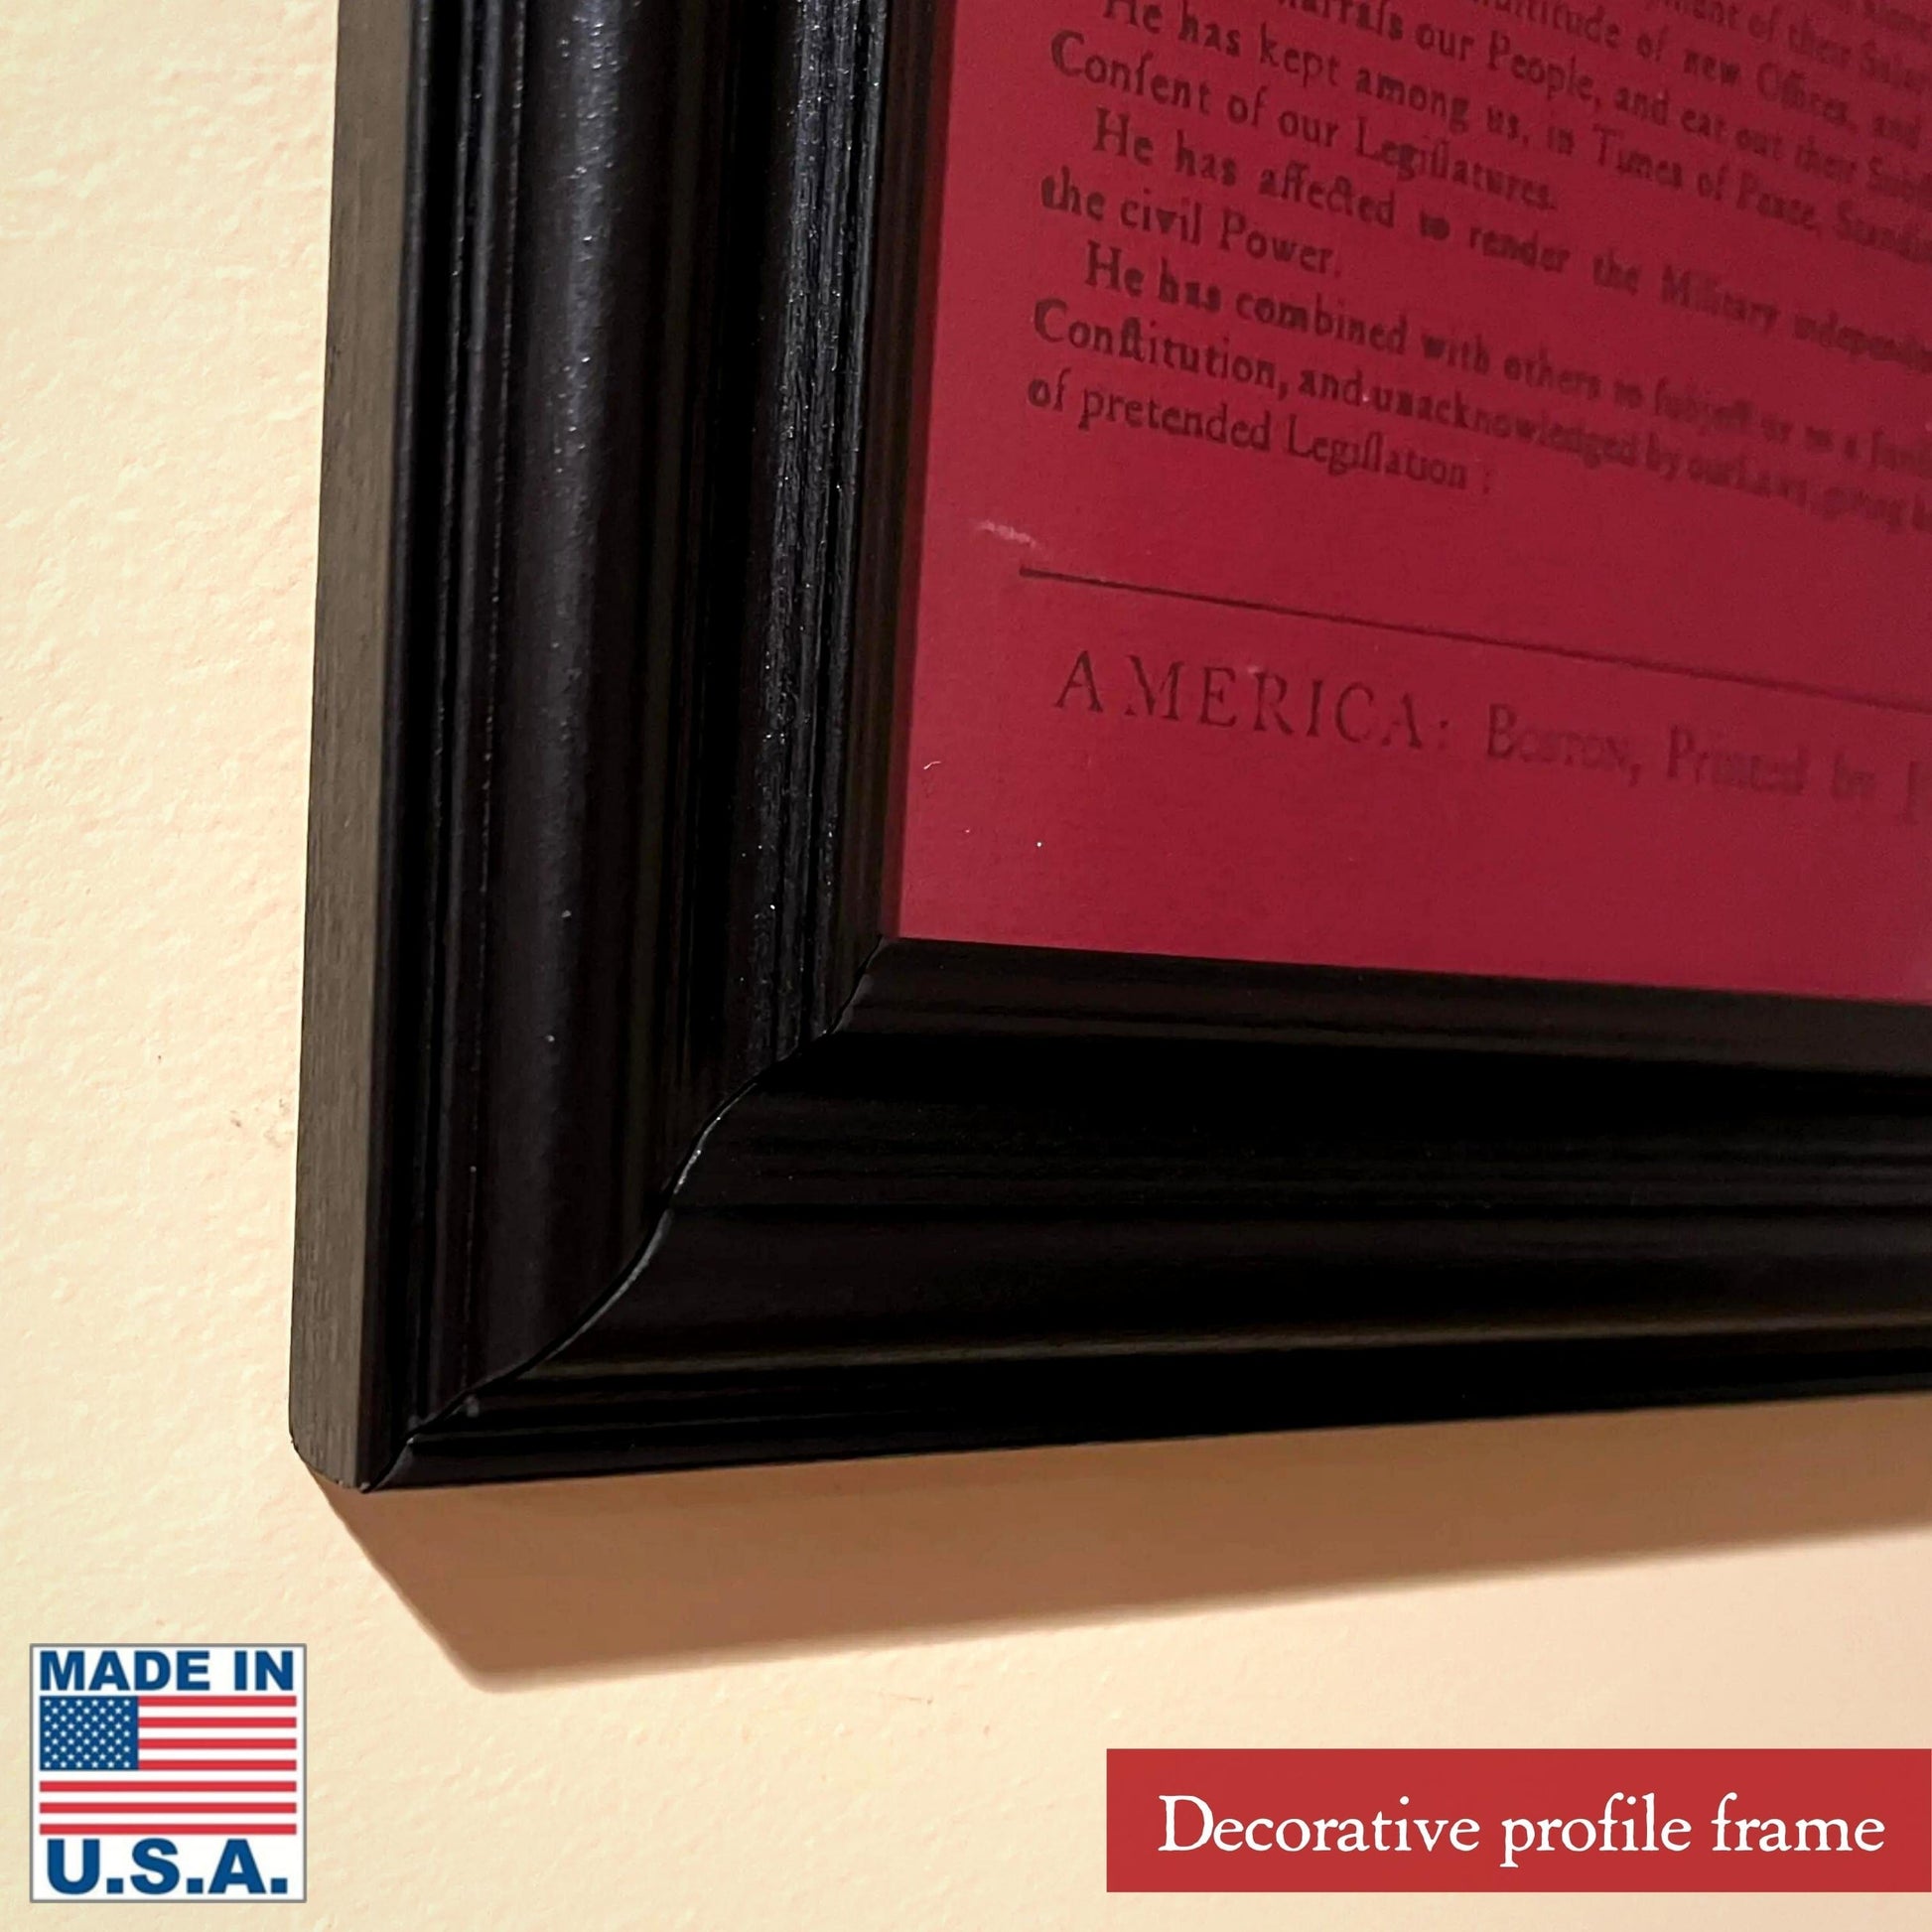 Edge of decorative profile frame of "Proclaim Liberty” on a Boston broadside of the Declaration of Independence from The History List store